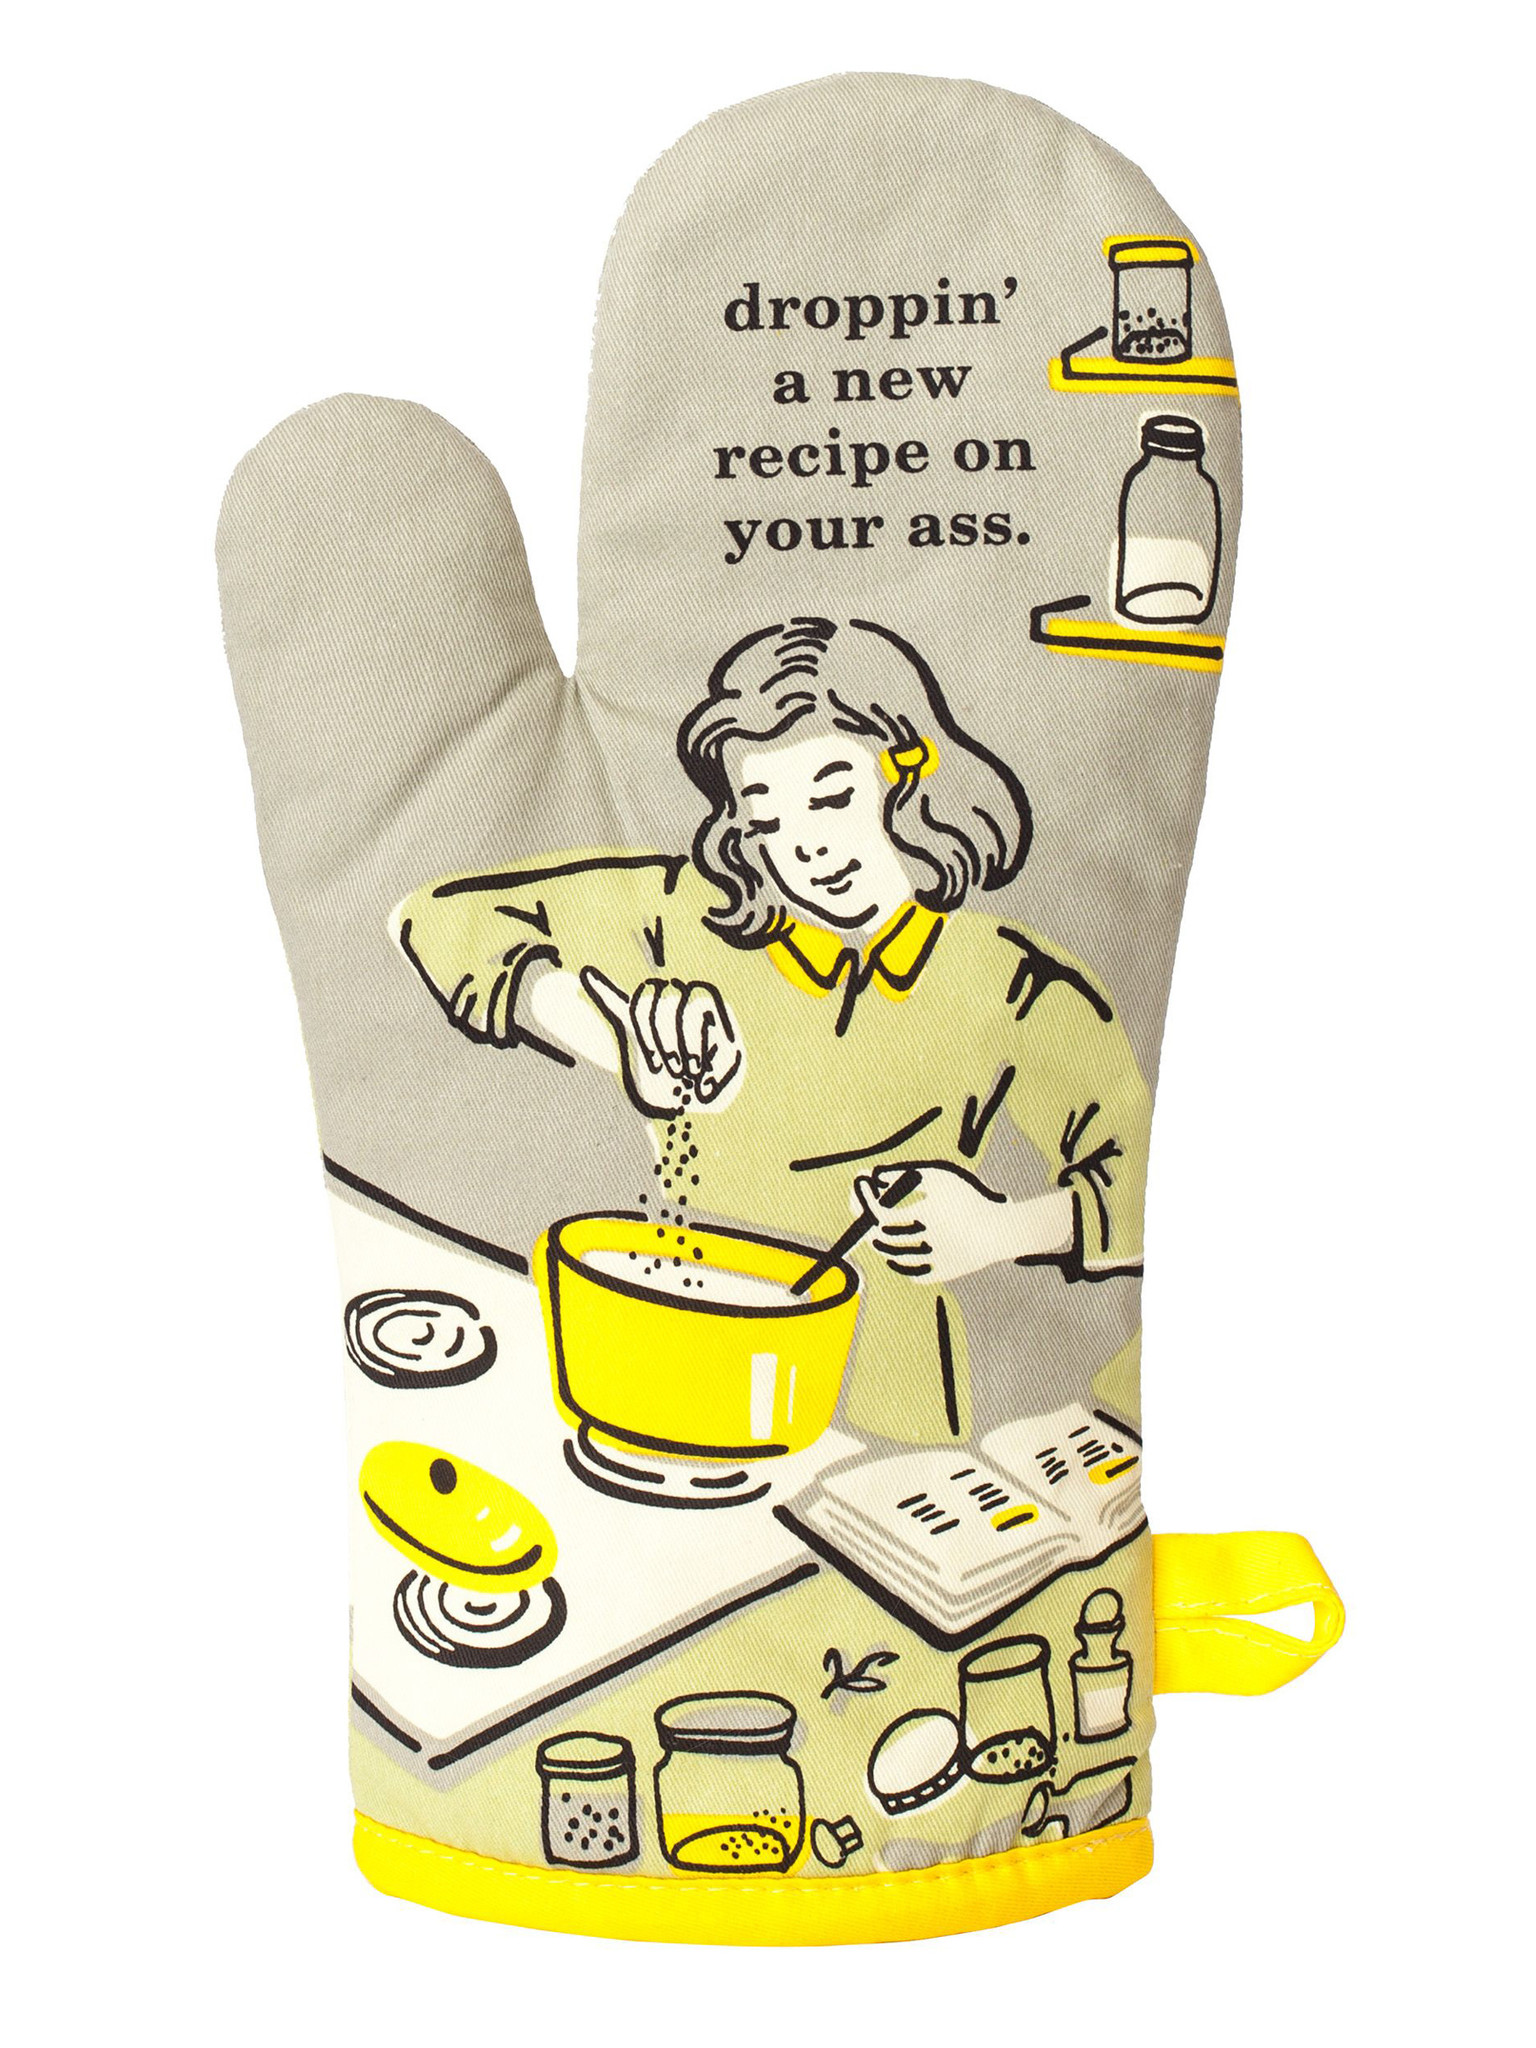 I Love My Asshole Kids Oven Mitt - Unique Gifts - Blue Q — Perpetual Kid